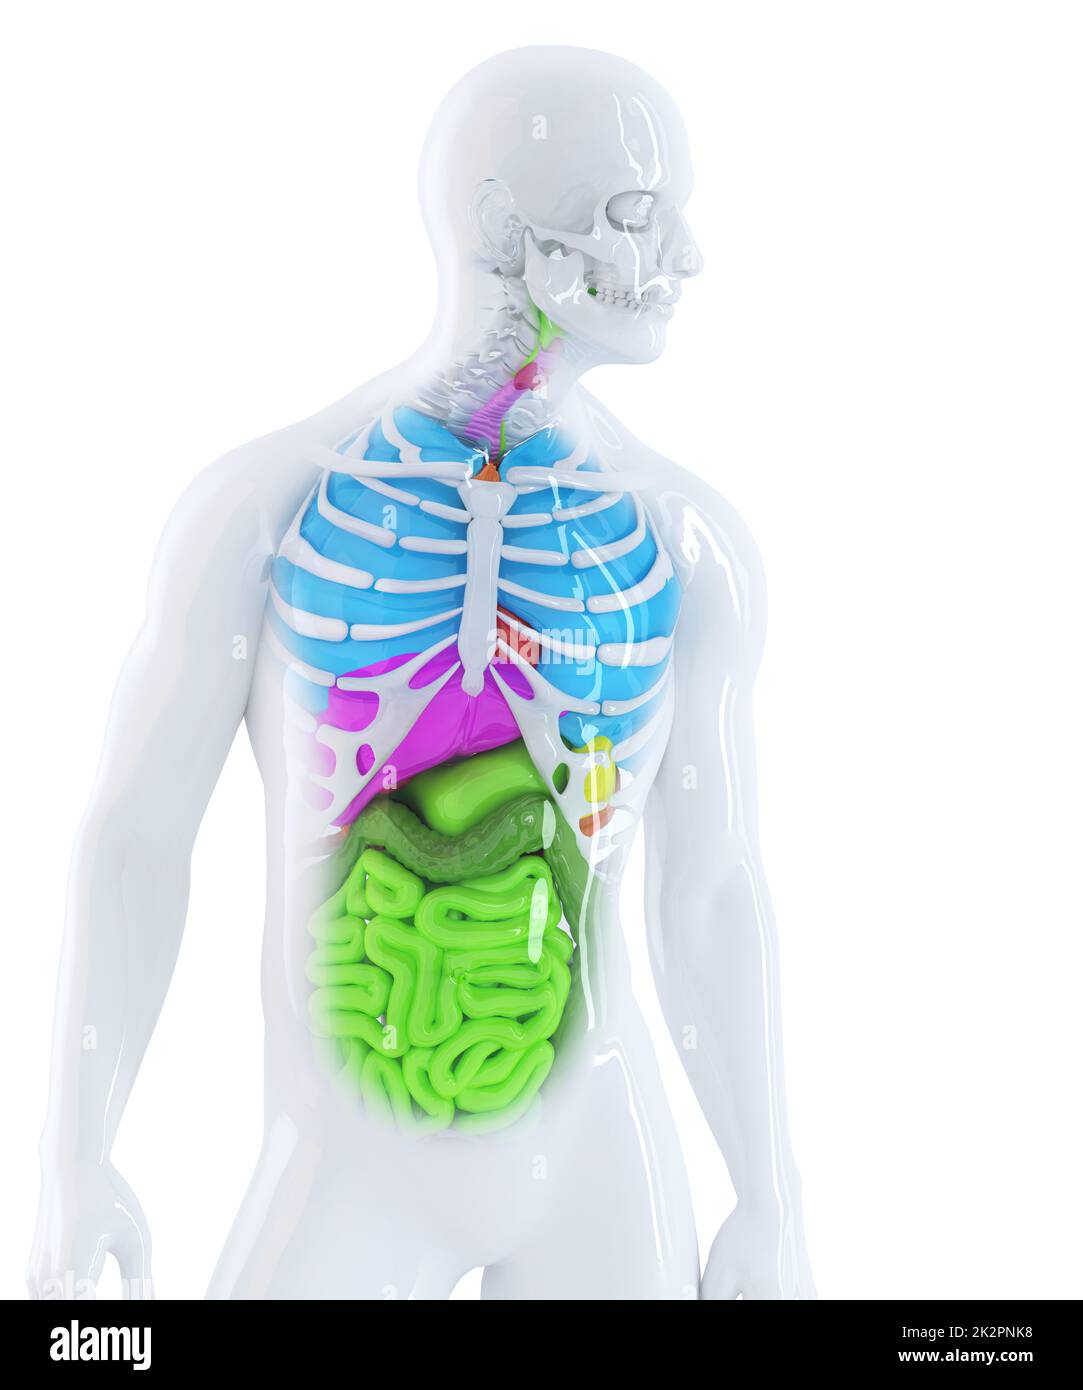 3d illustration of the human anatomy. Isolated. Contains clipping path Stock Photo